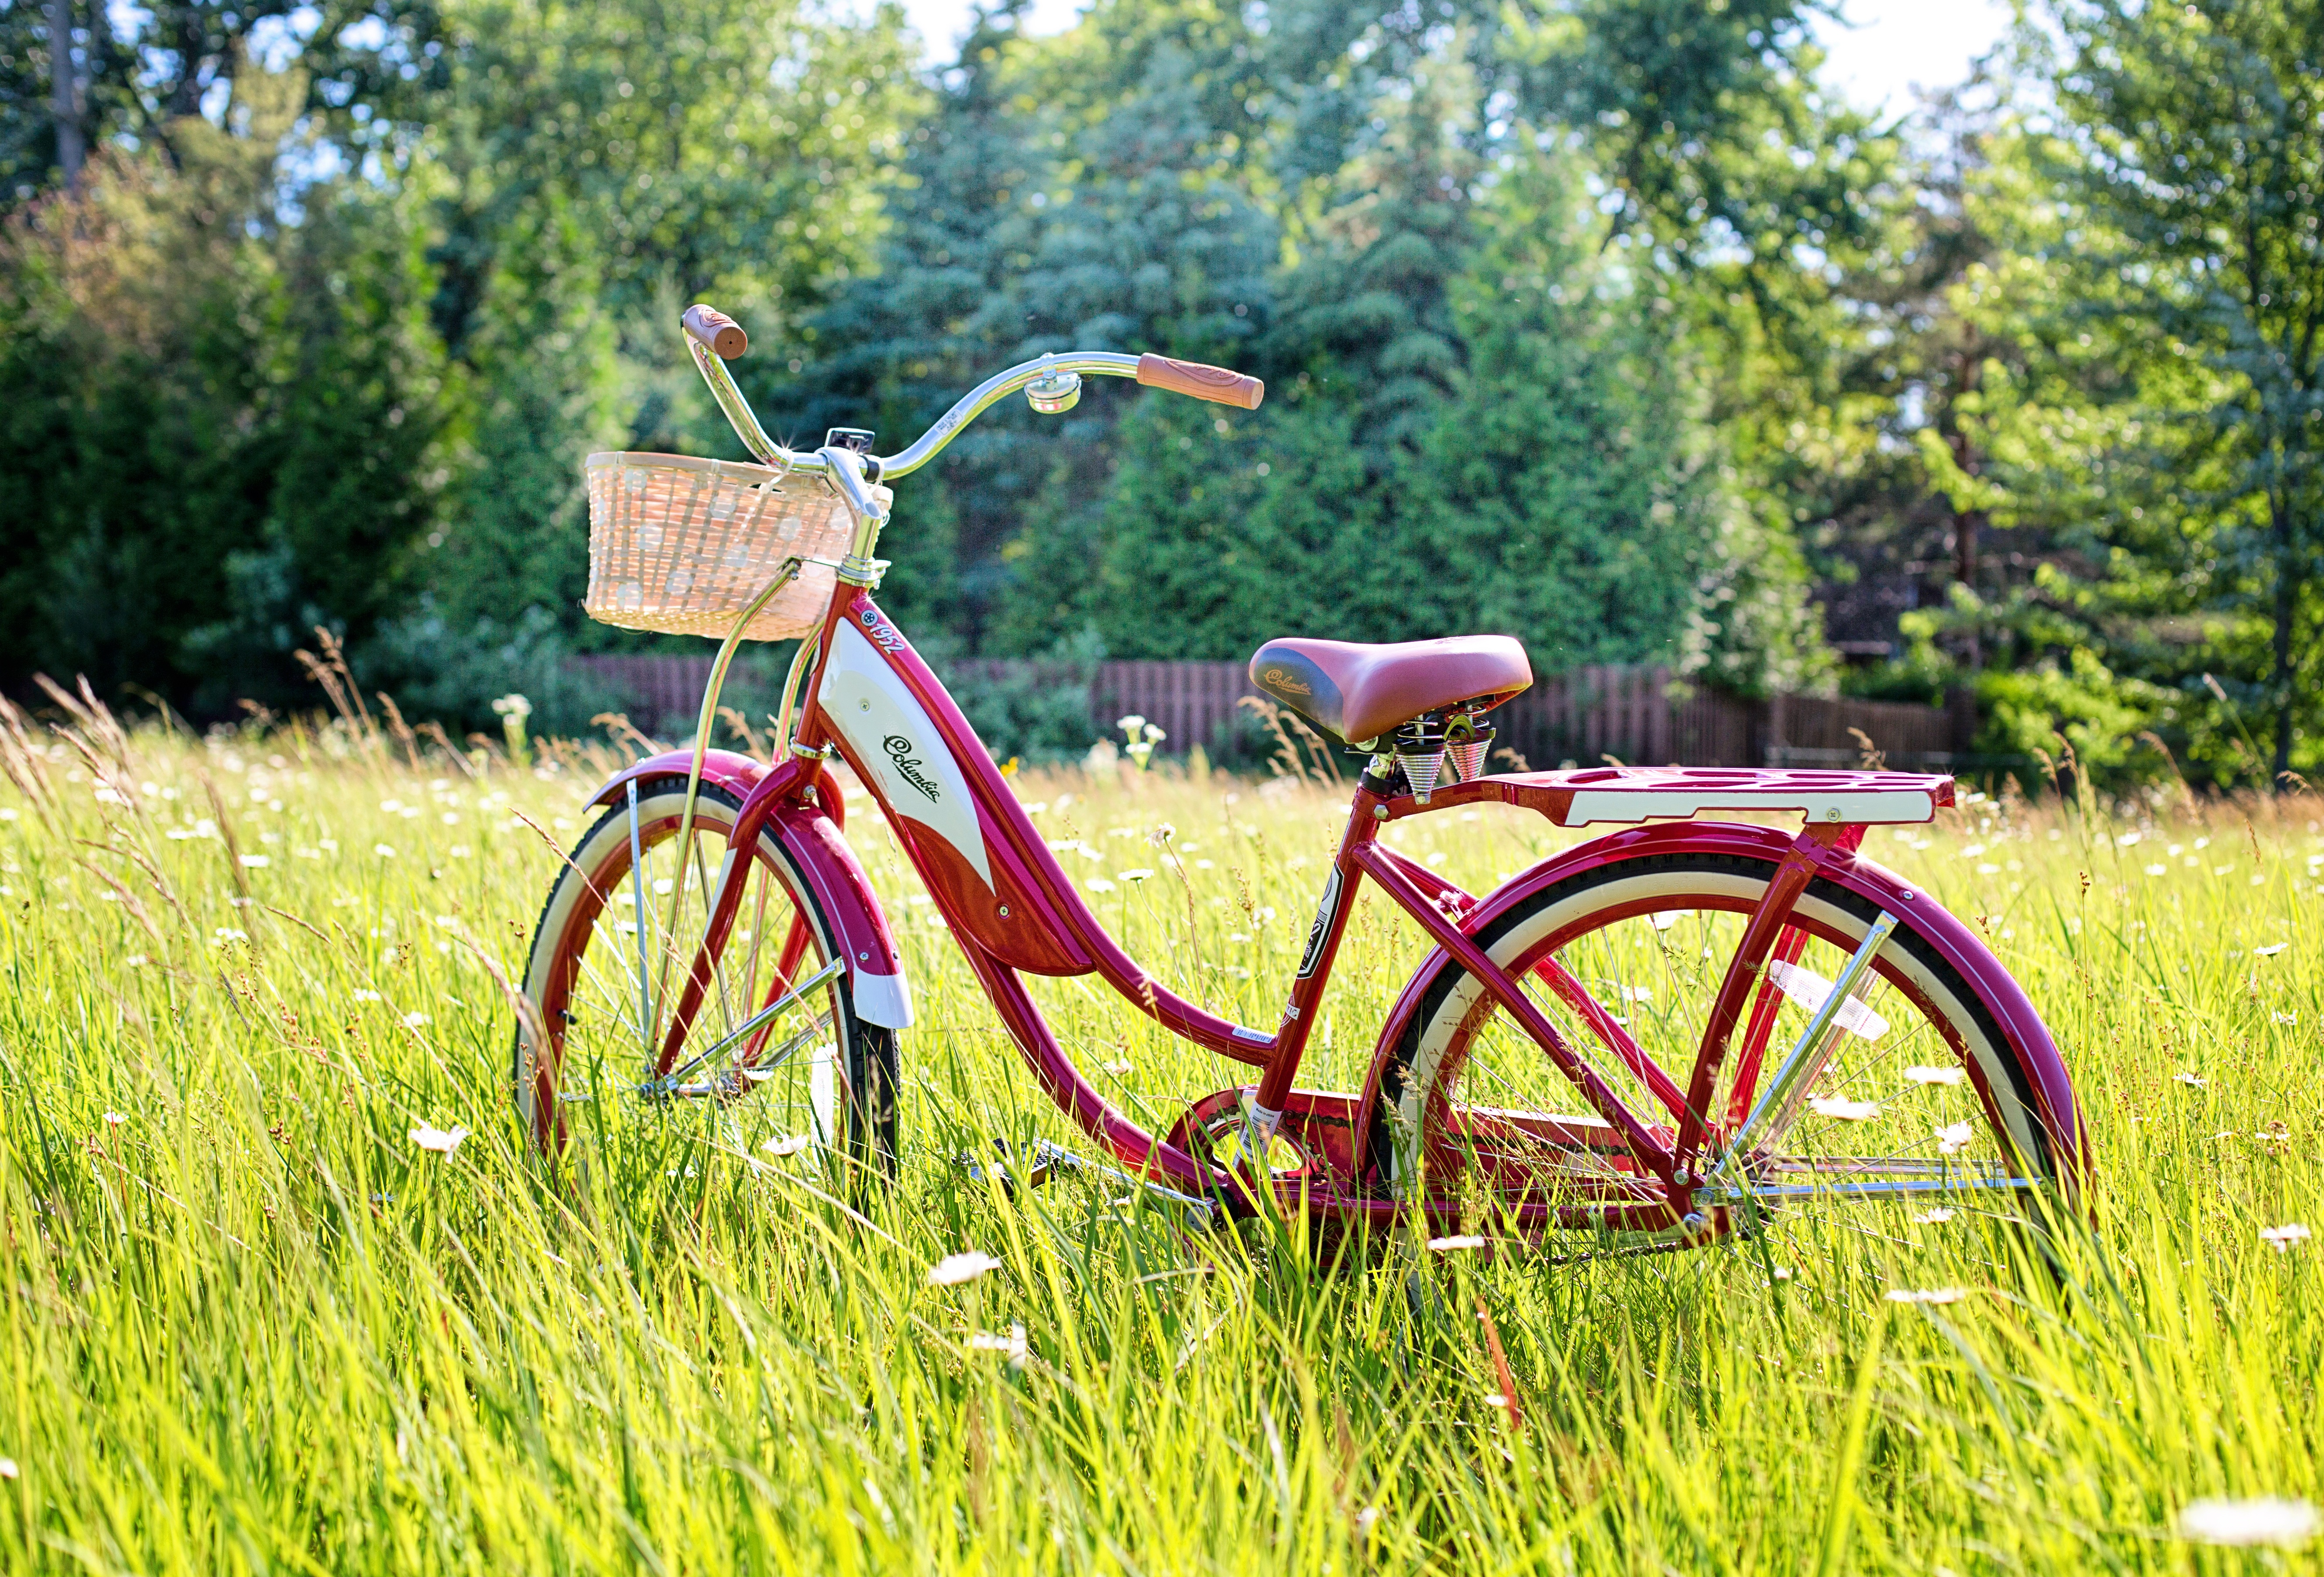 summer, miscellanea, miscellaneous, vintage, sunlight, bicycle Full HD